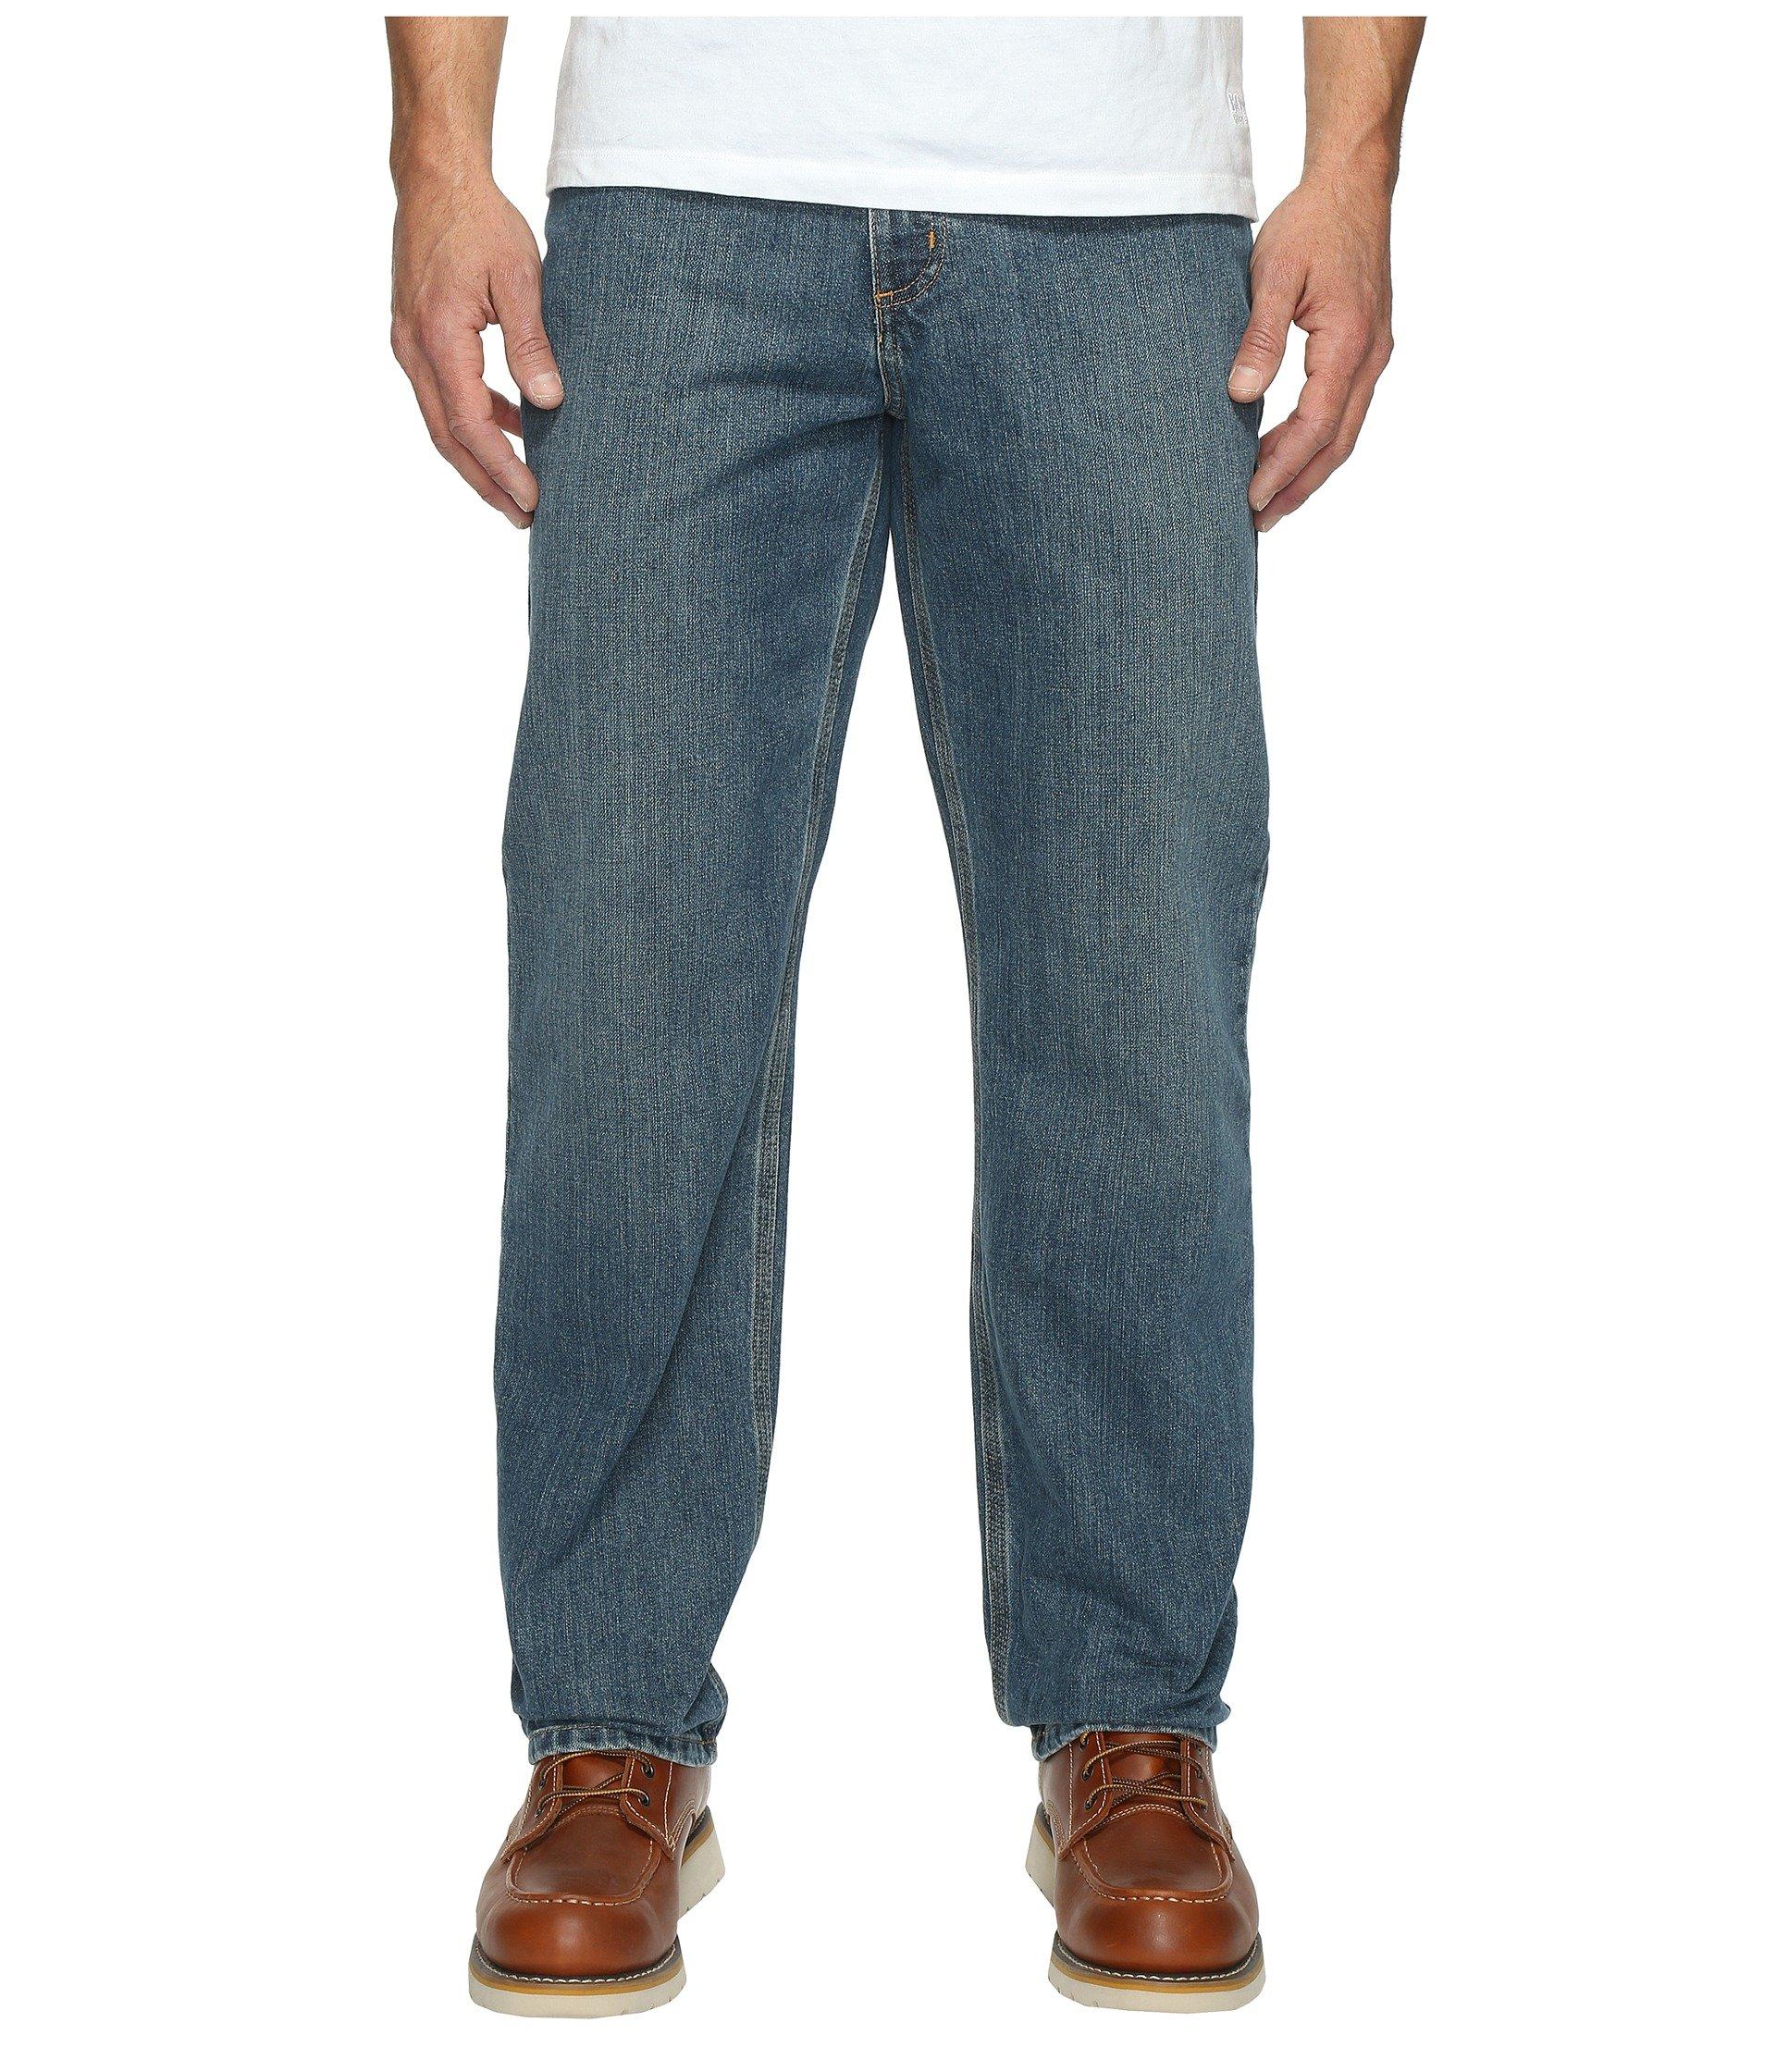 Carhartt Denim Relaxed Fit Holter Jeans in Blue for Men - Lyst